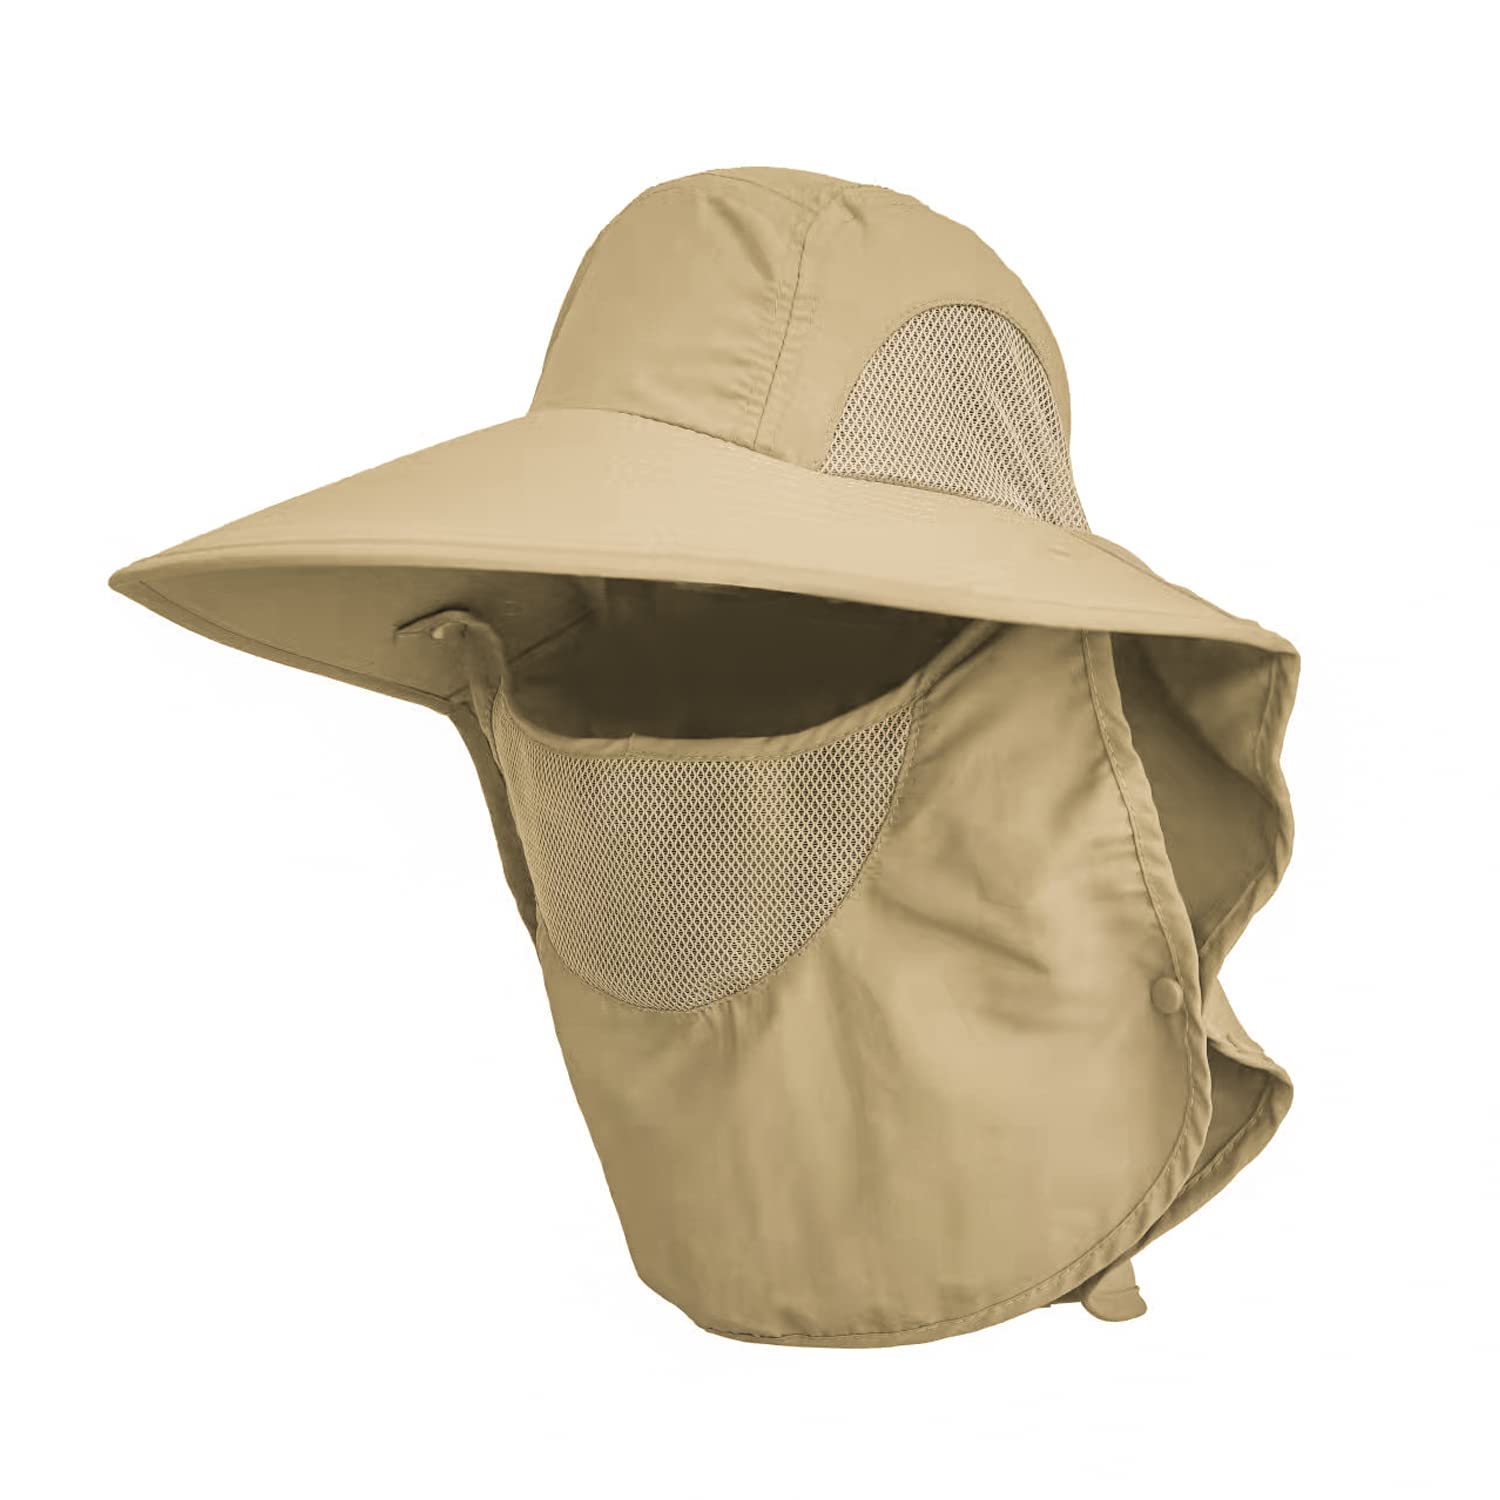 Ghosthorn Bonnie Hat,Sun Protection Fishing Hat Folding for Easy Carry